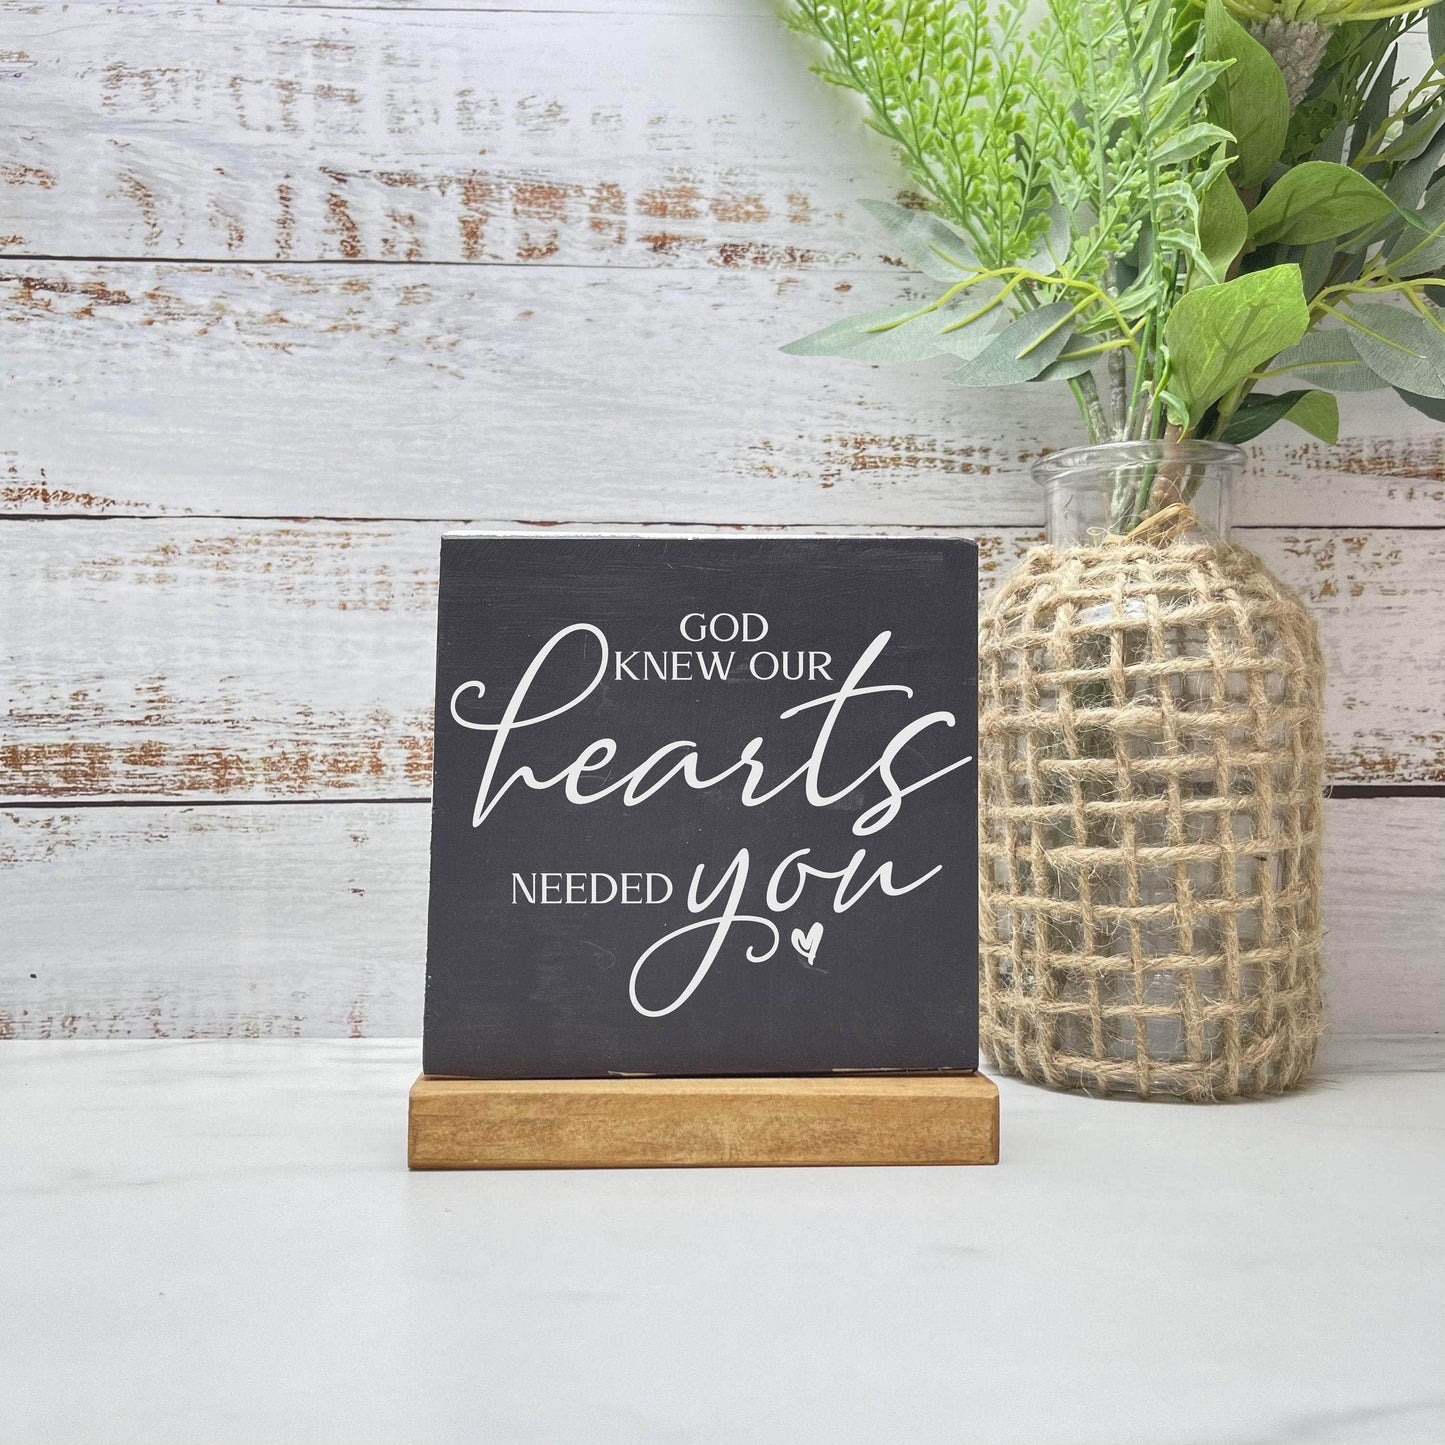 God knew our hearts needed you wood sign, farmhouse sign, rustic decor, home decor